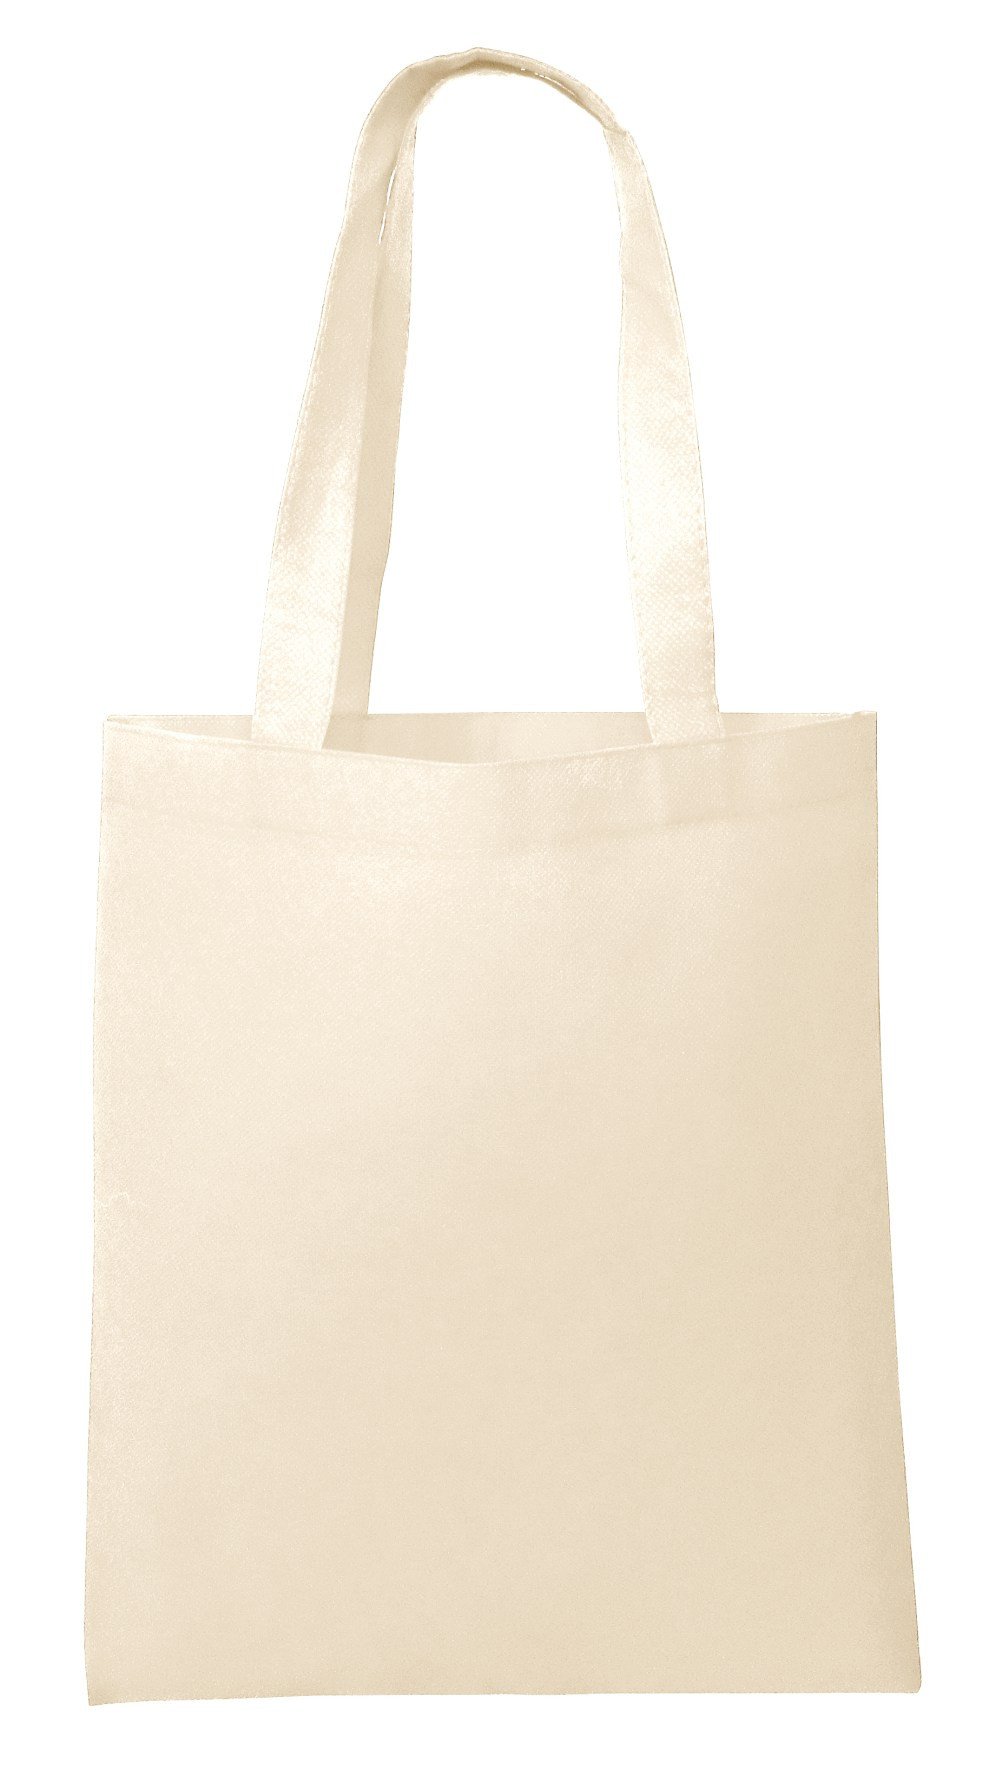 Cheap Promotional Tote Bags natural